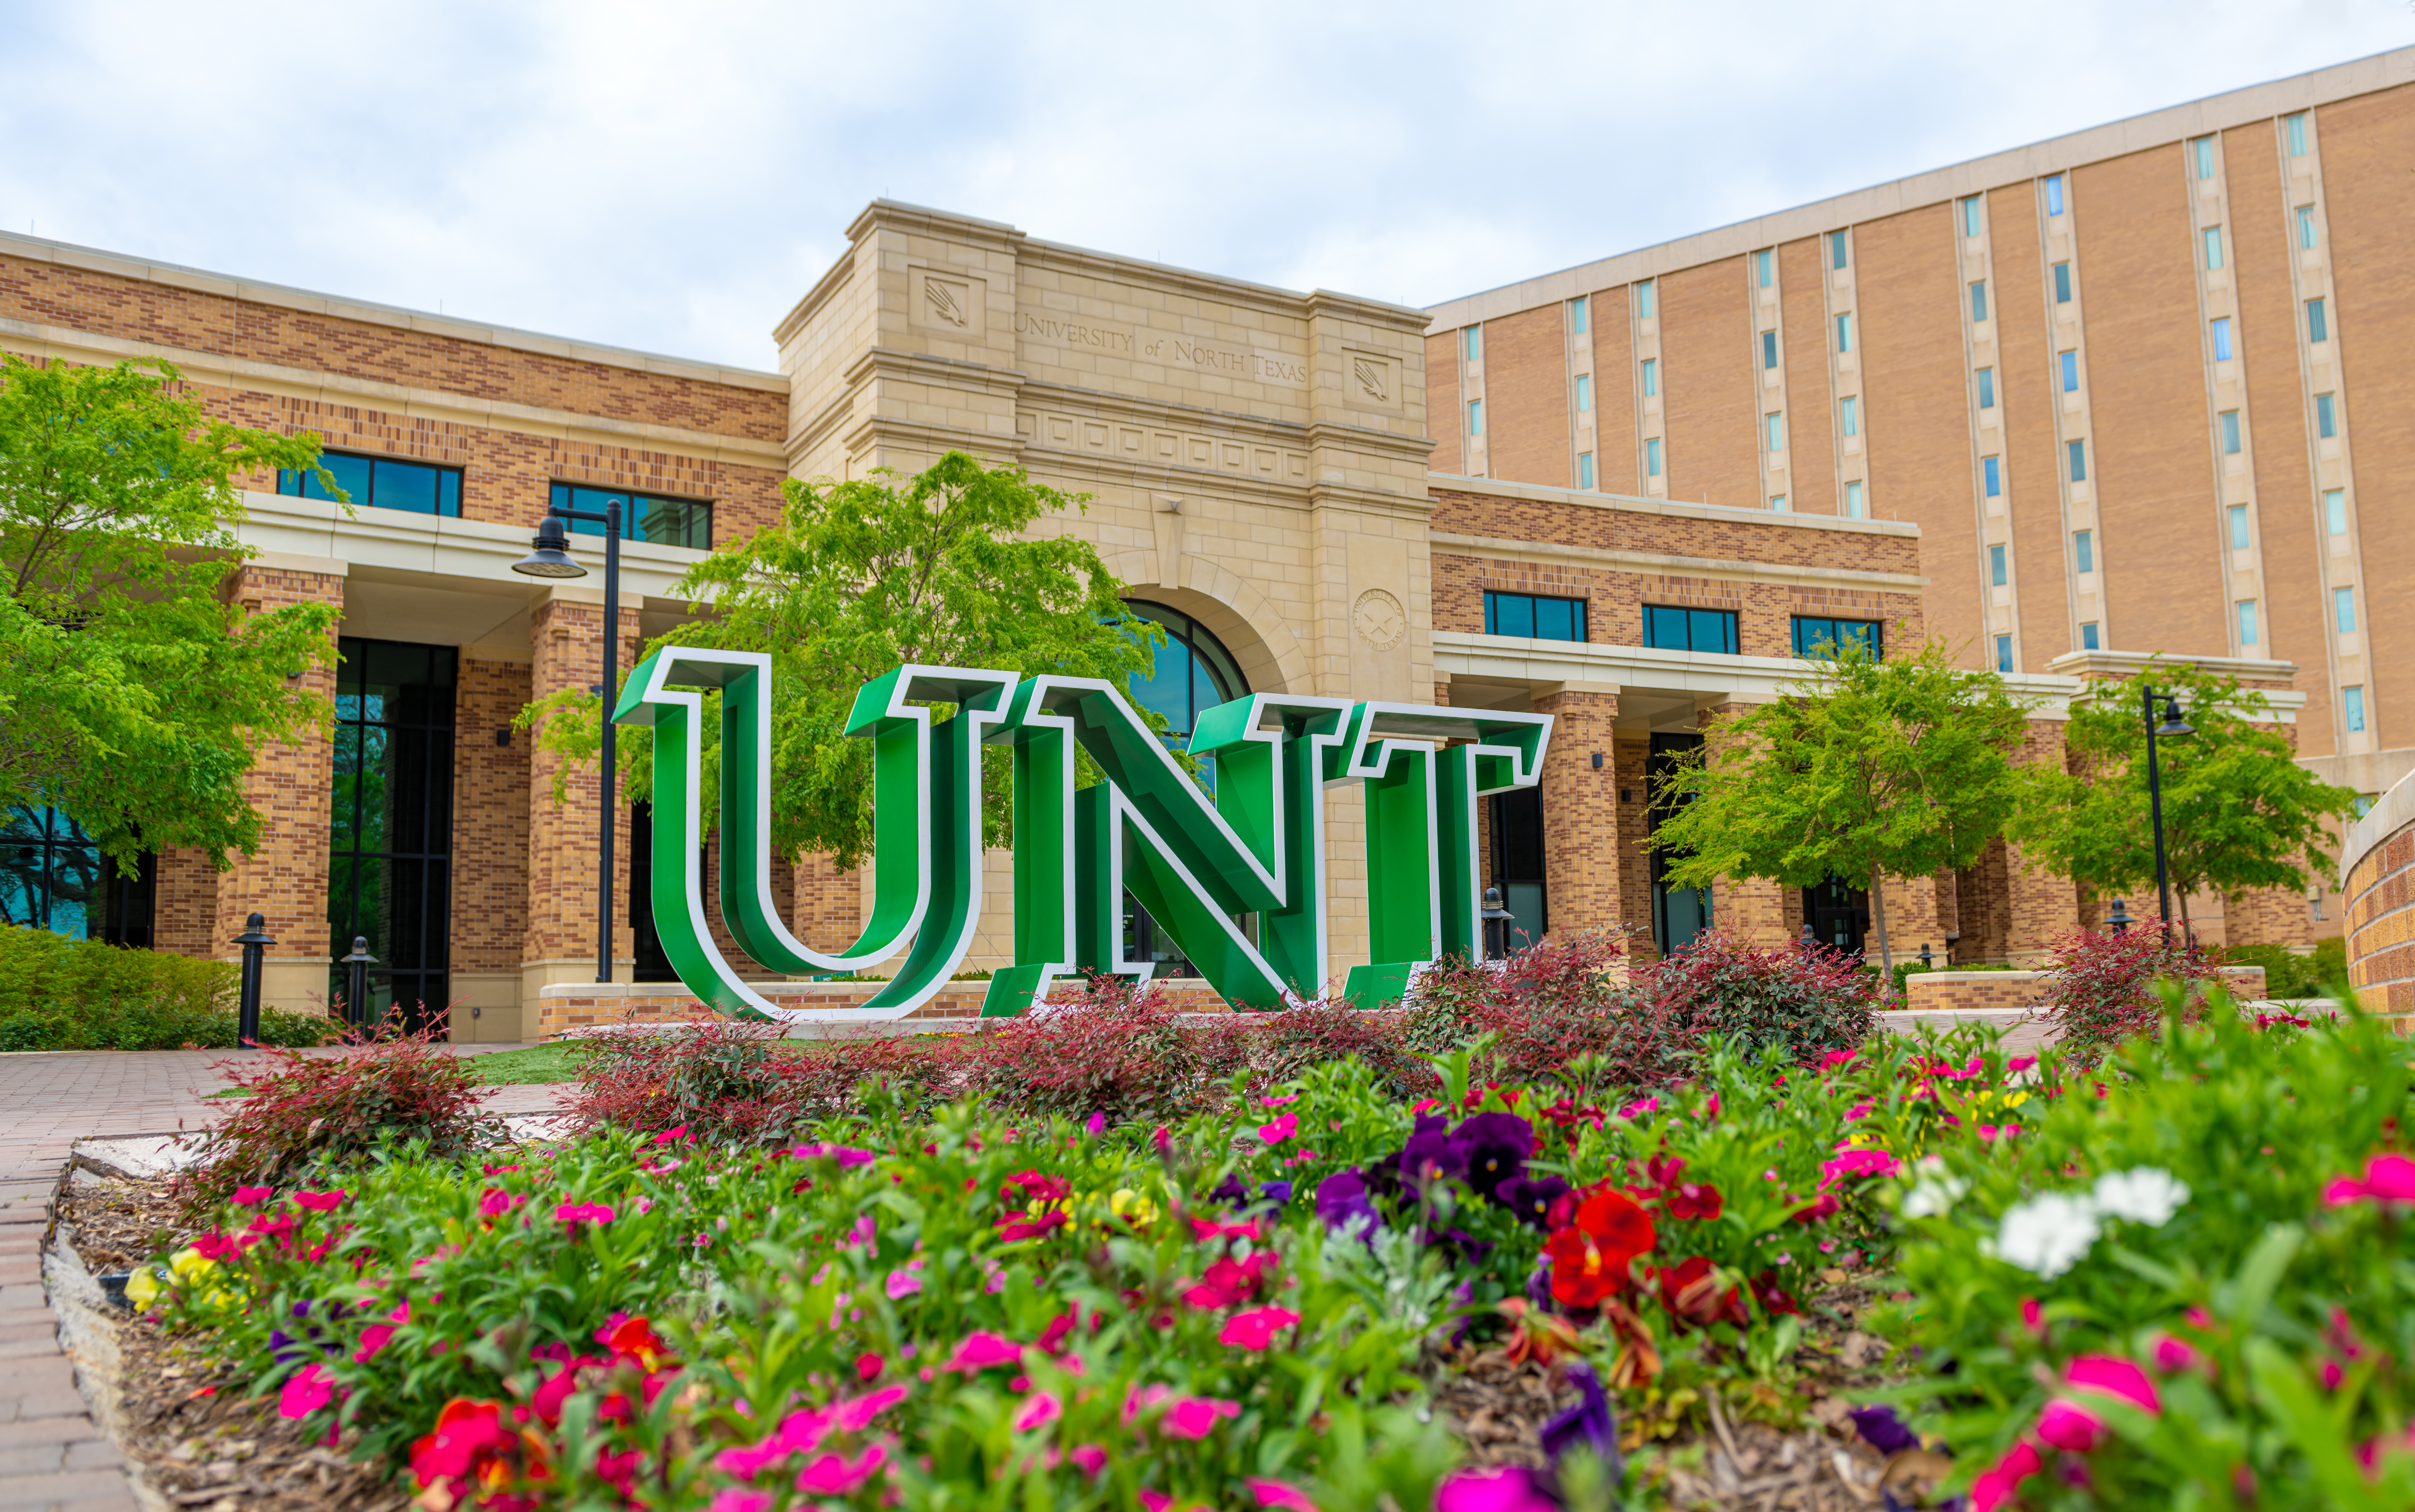 Creating a Culture of Data Use: A Case Study on the University of North Texas